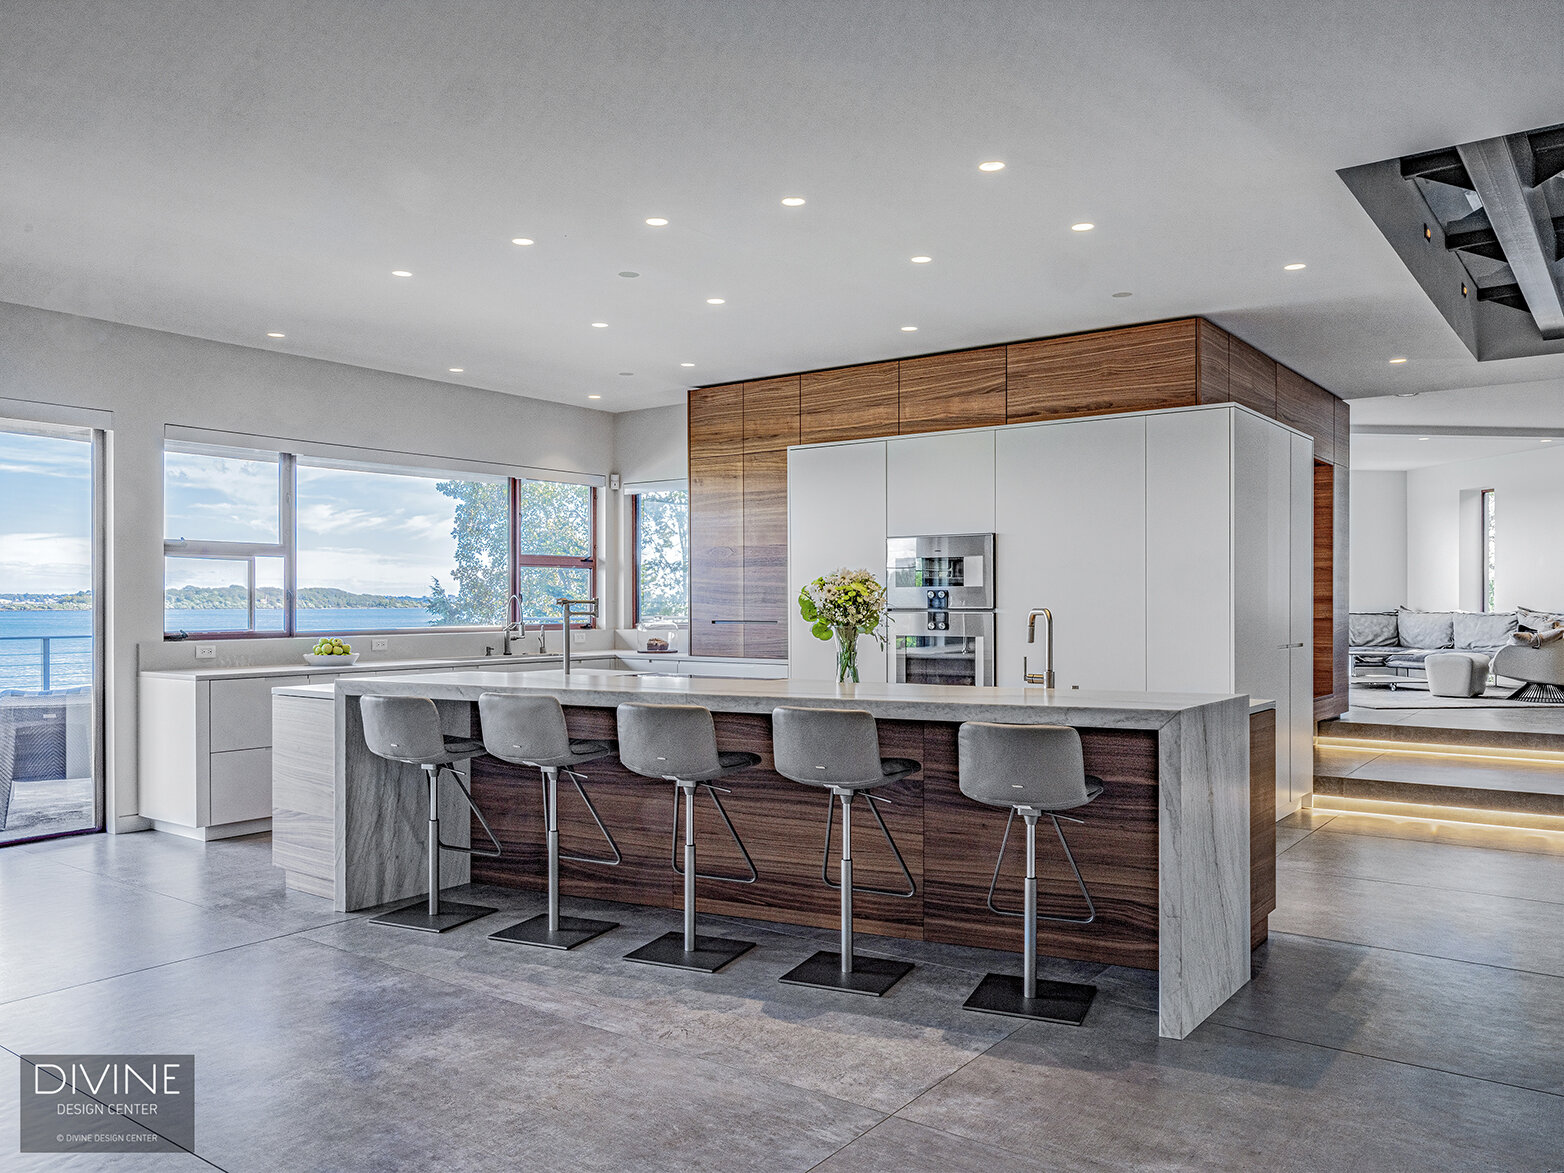  Modern, Leicht kitchen with an extra large, waterfall kitchen island sitting five. A calacatta marble island top pairs with a walnut toe kick and walnut accents throughout the space. High gloss, white paneled kitchen cabinets hide the refrigerator a